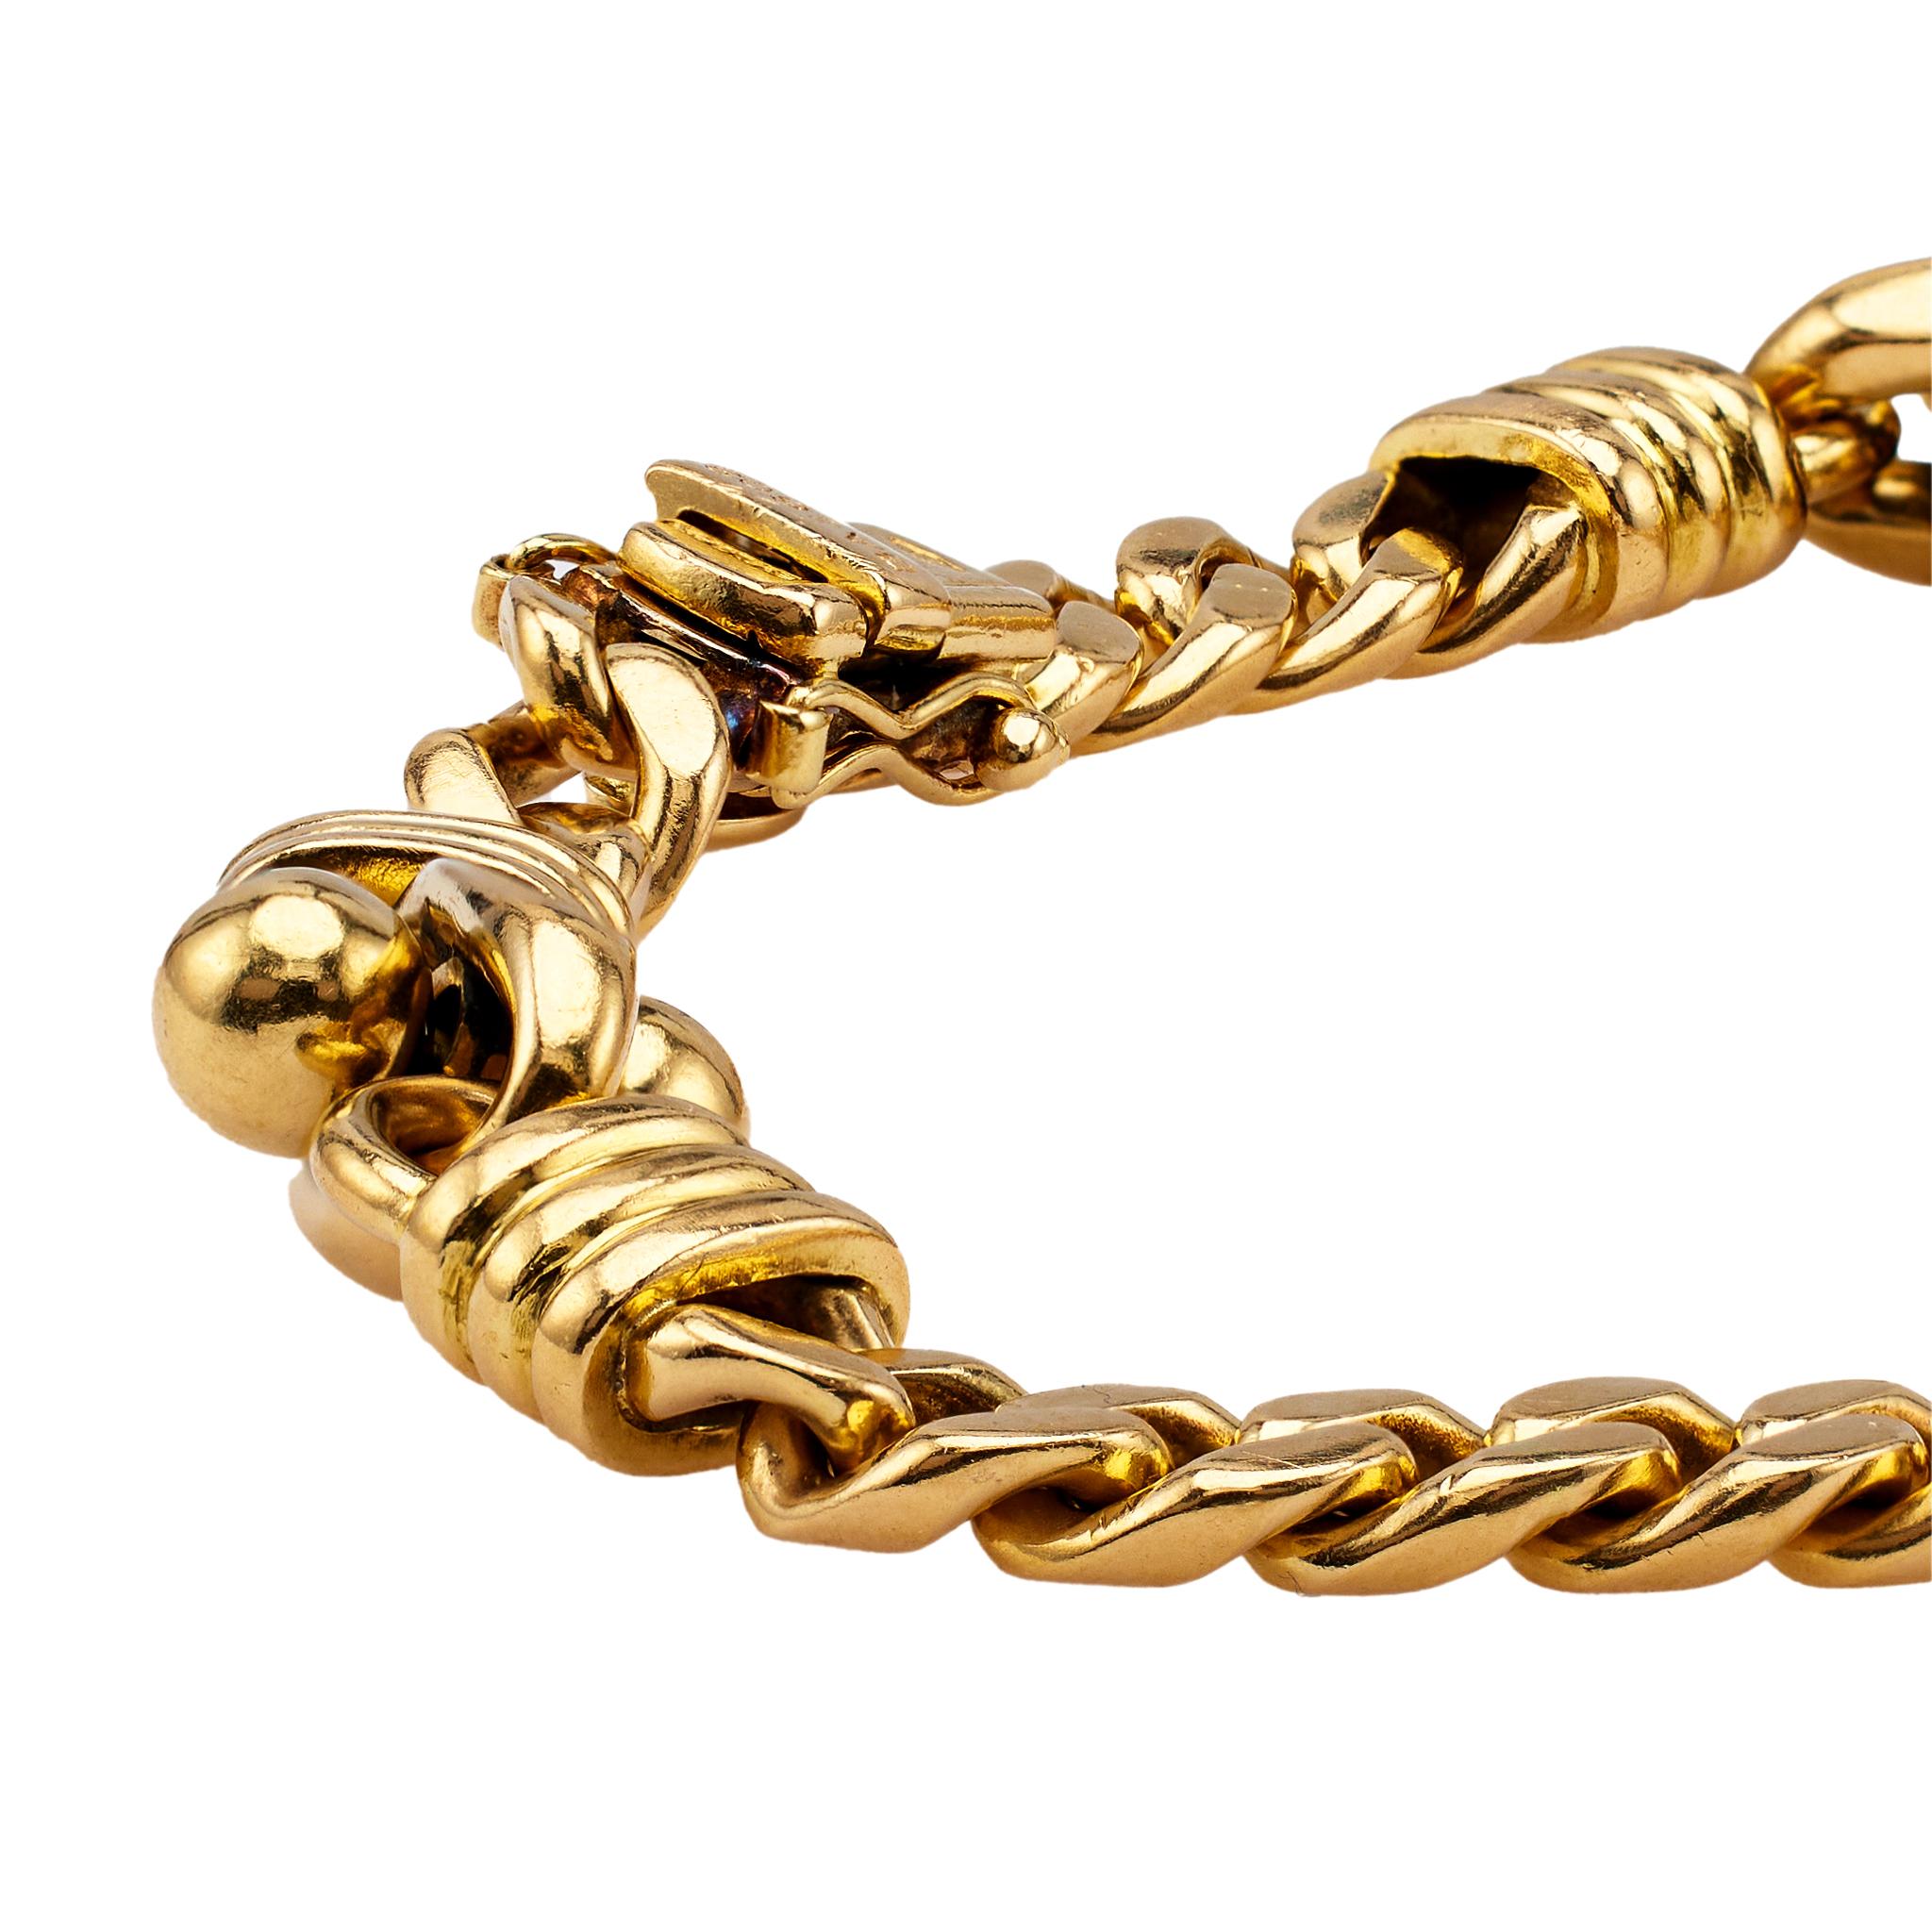 Vintage Bvlgari Italy 18k Yellow Gold Chain Link Bracelet For Sale 1